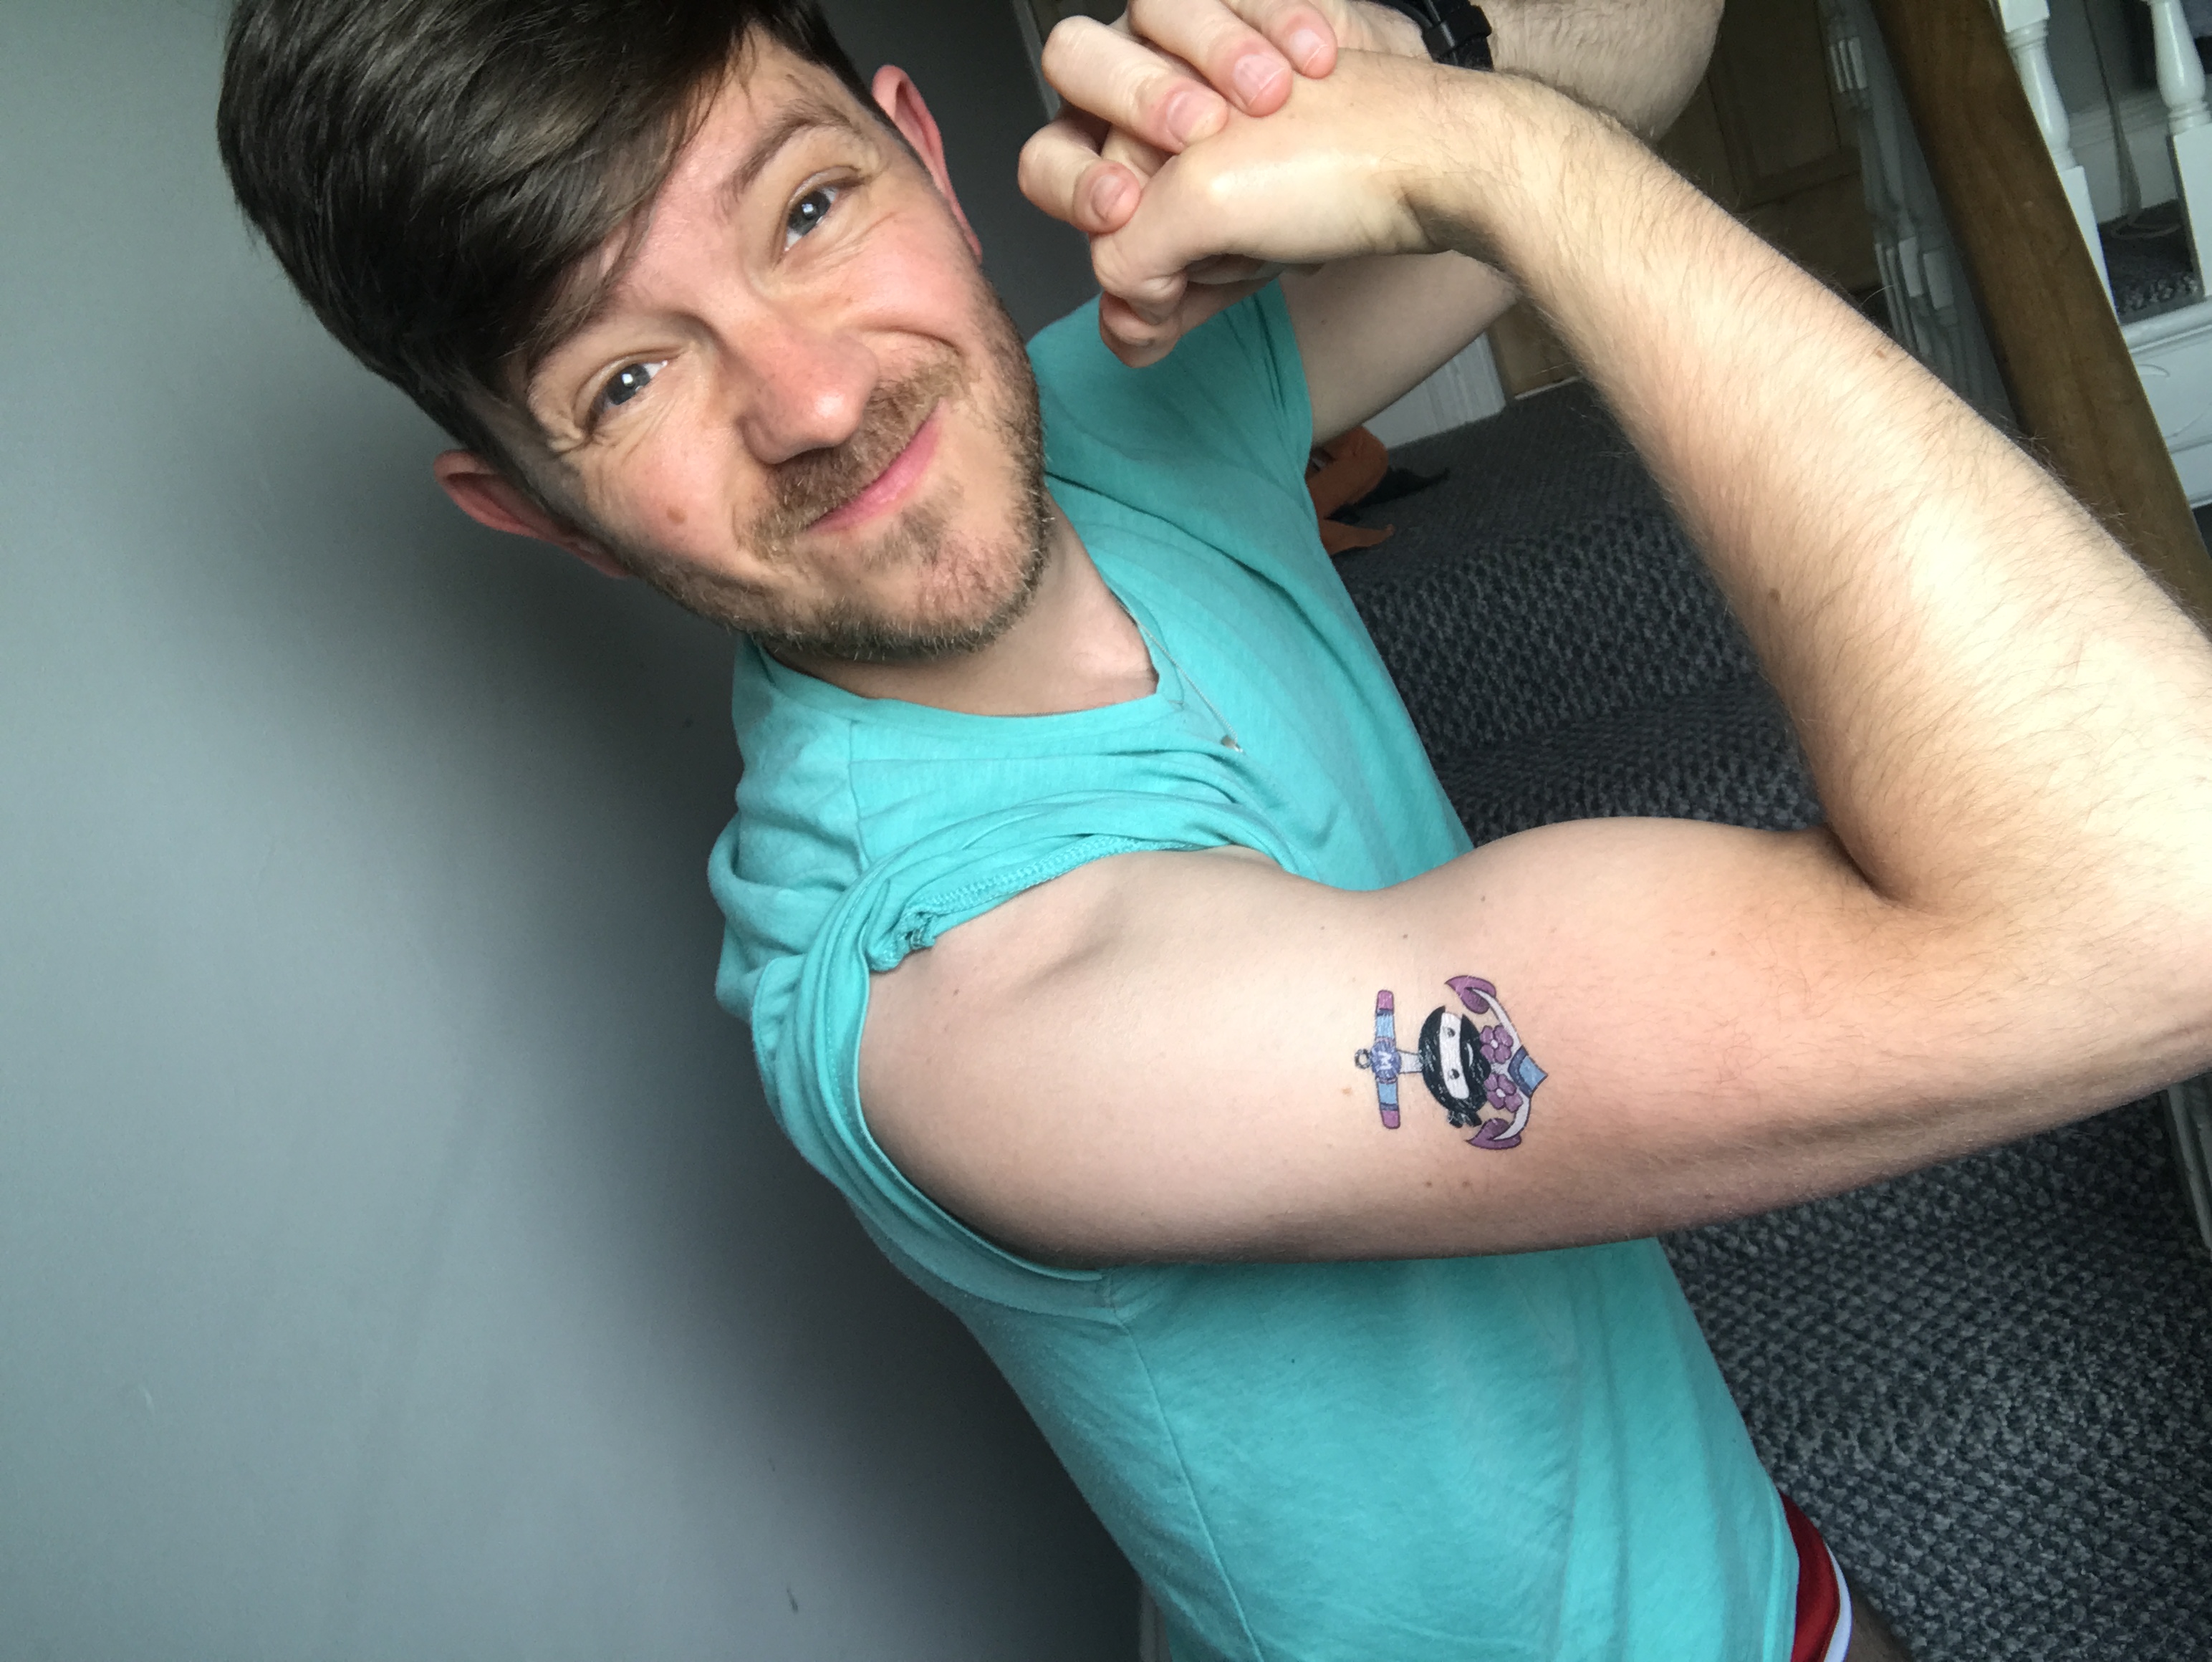 Neil Hainsworth showing off WooCommerce temporary tattoos on his arm